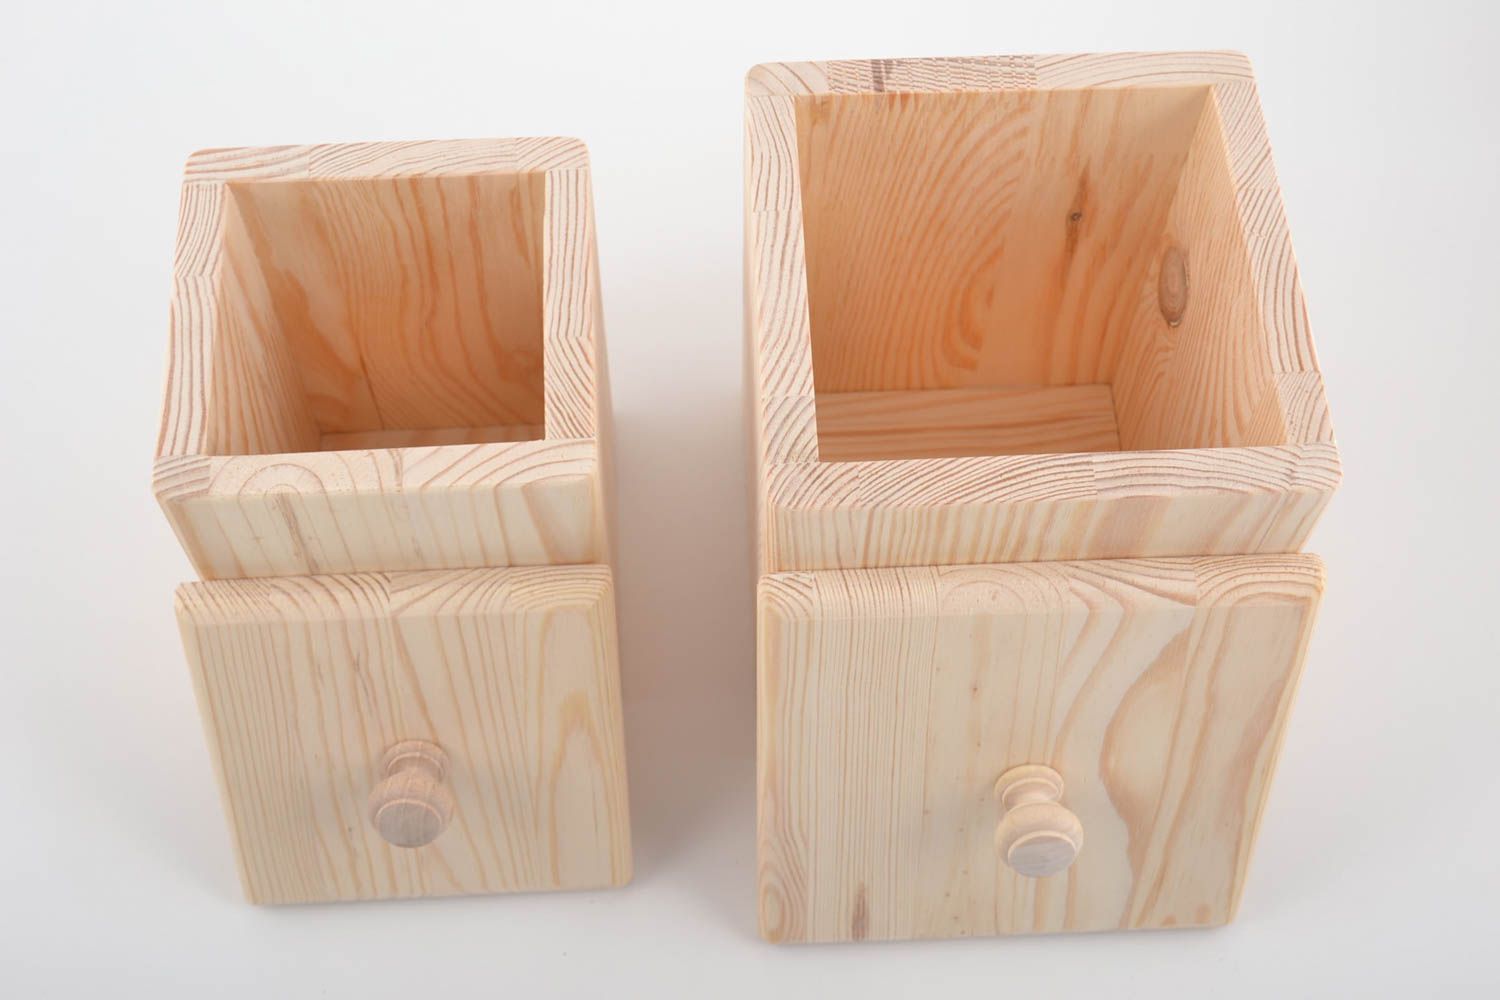 Set of 2 handmade wooden craft blanks tall square boxes with removable lids photo 4